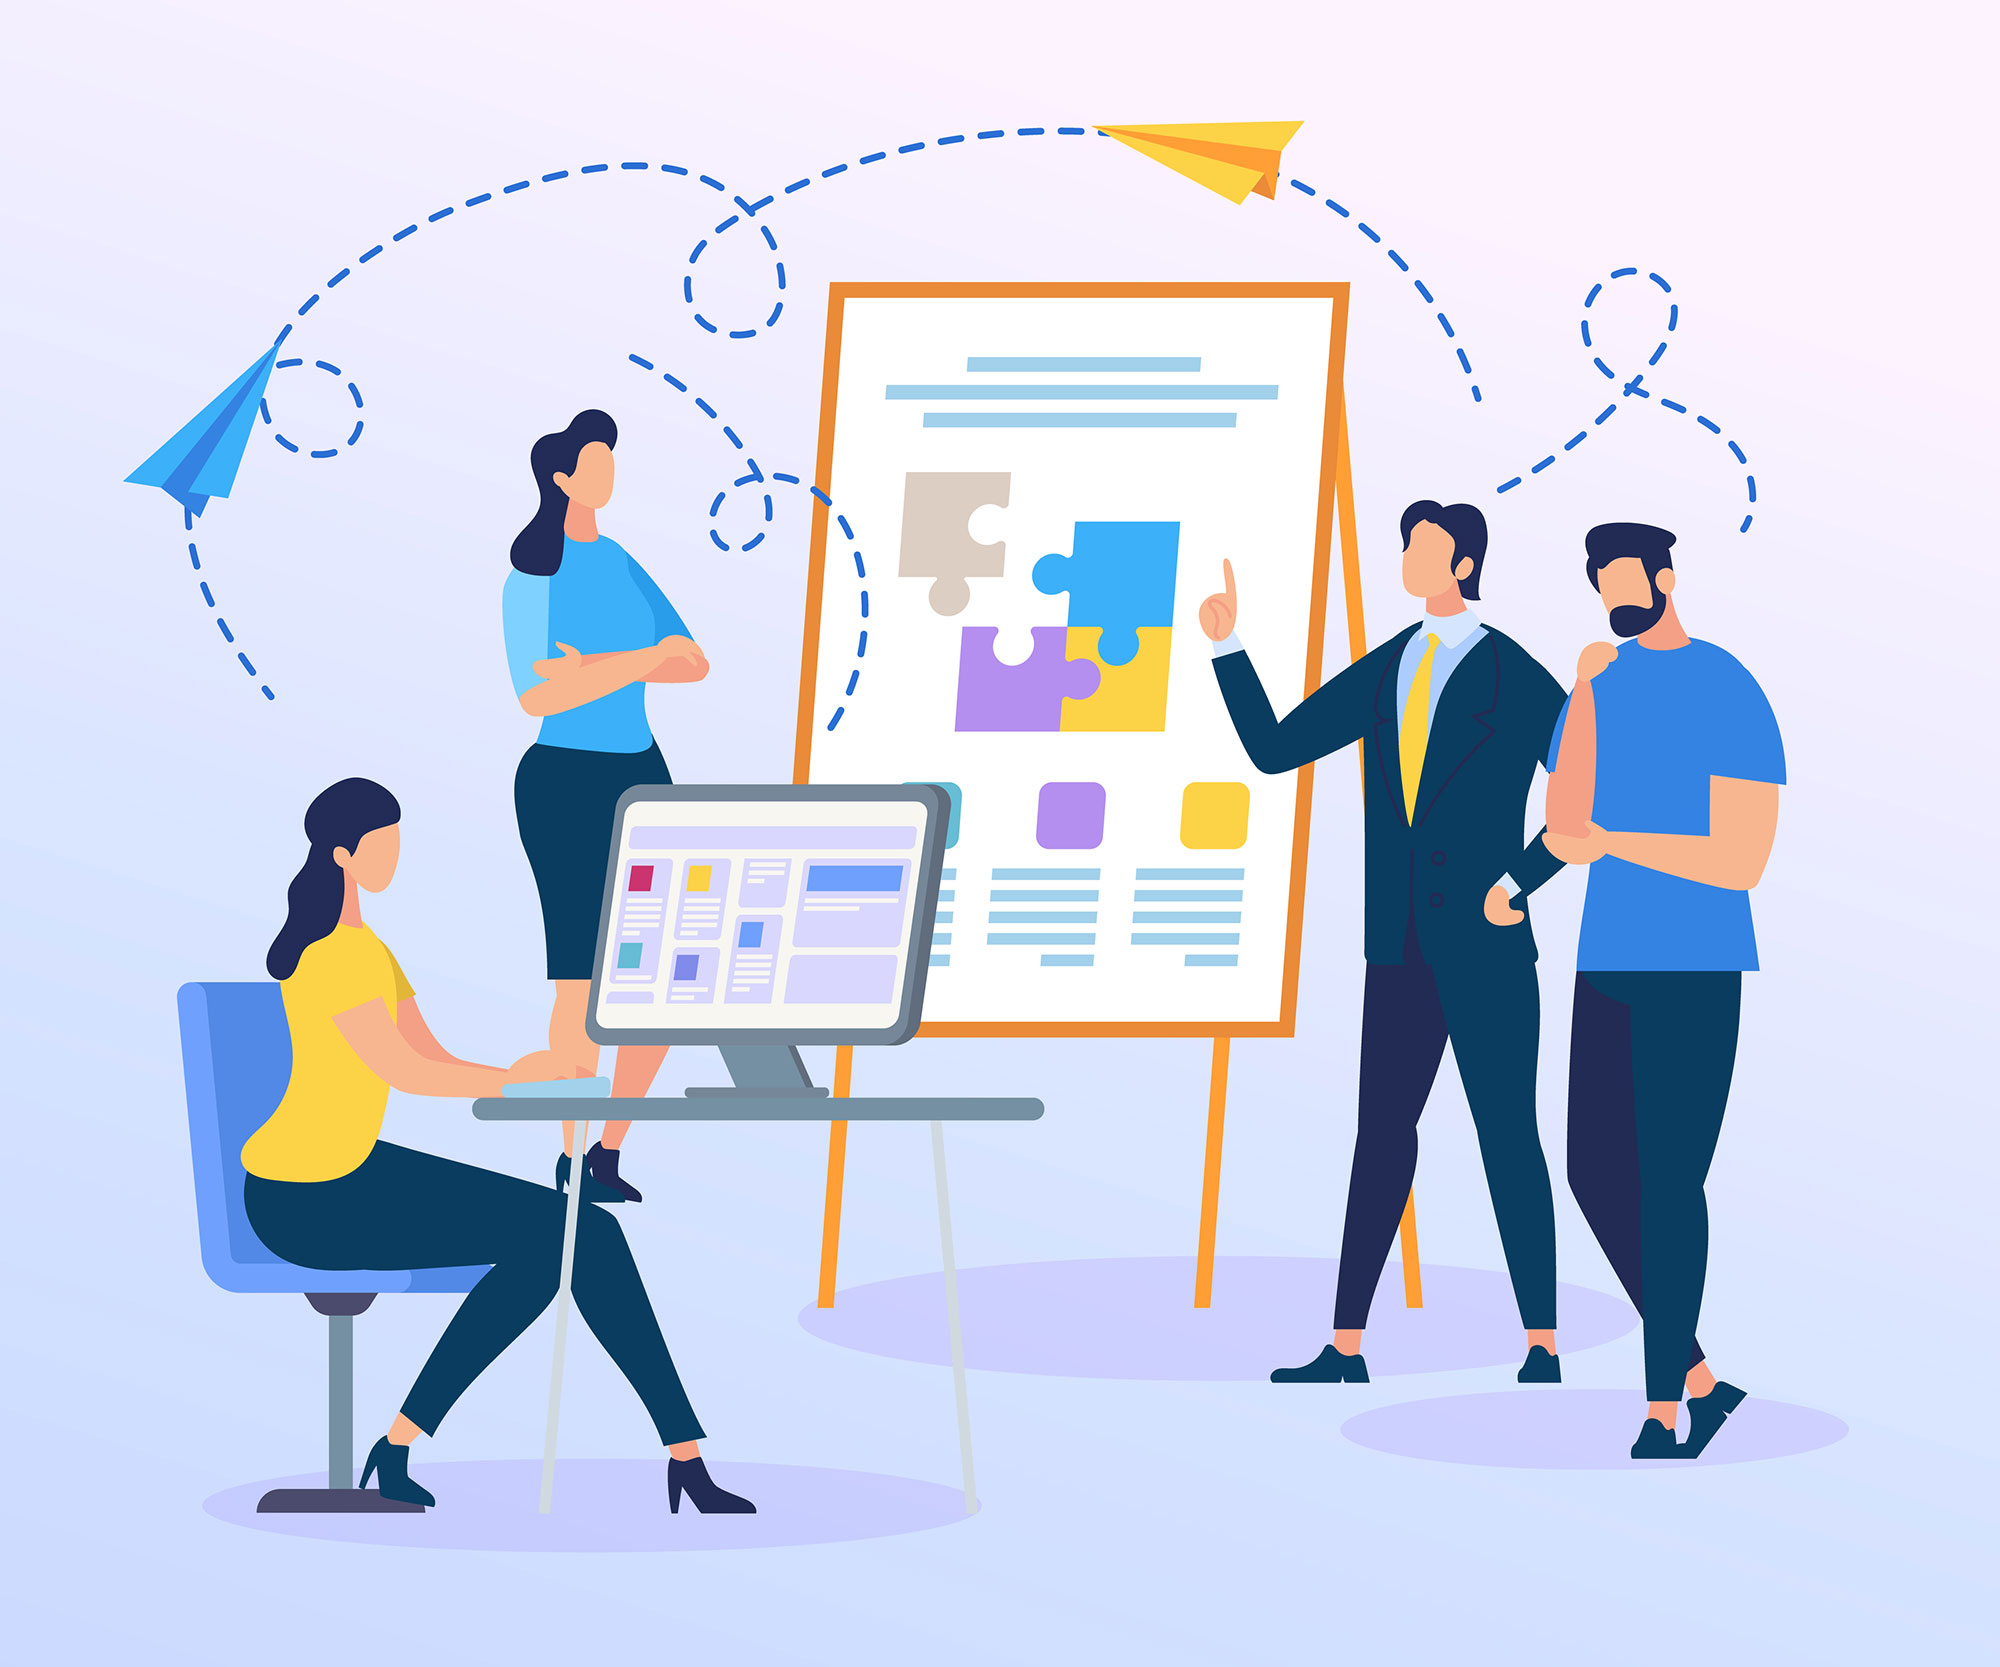 Business Trainer Presentation of Colorful Puzzle Pieces on Flip Board. People Work on Team Building. Creation of Successful Project. Men and Women Characters Working Together. Flat Vector Illustration